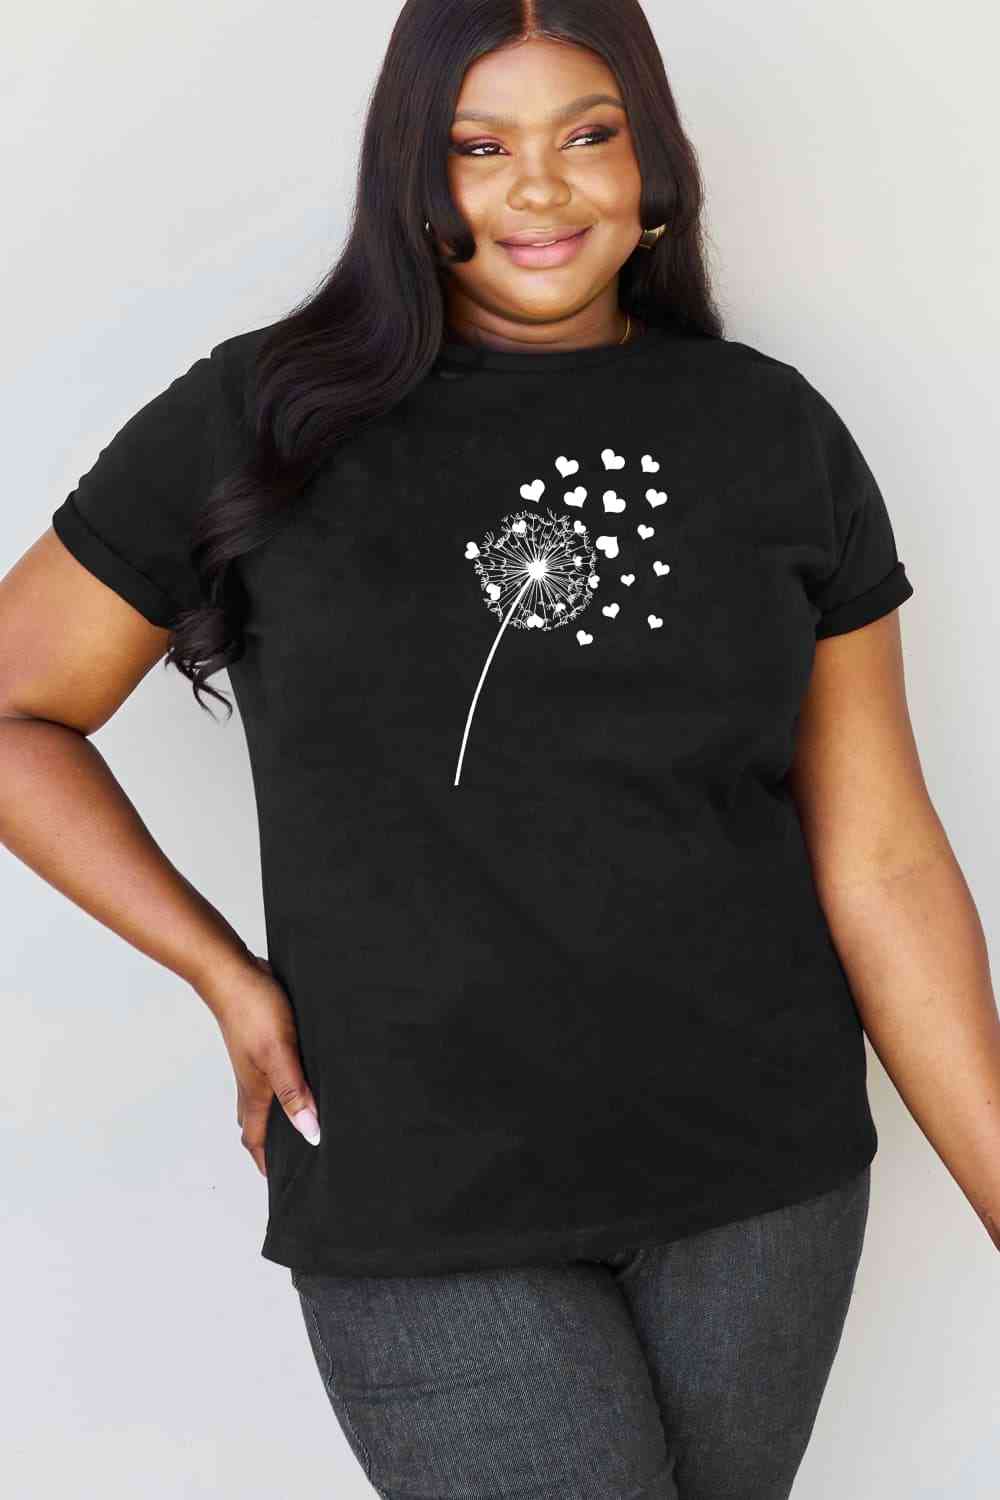 Simply Love Full Size Dandelion Heart Graphic Cotton T-Shirt